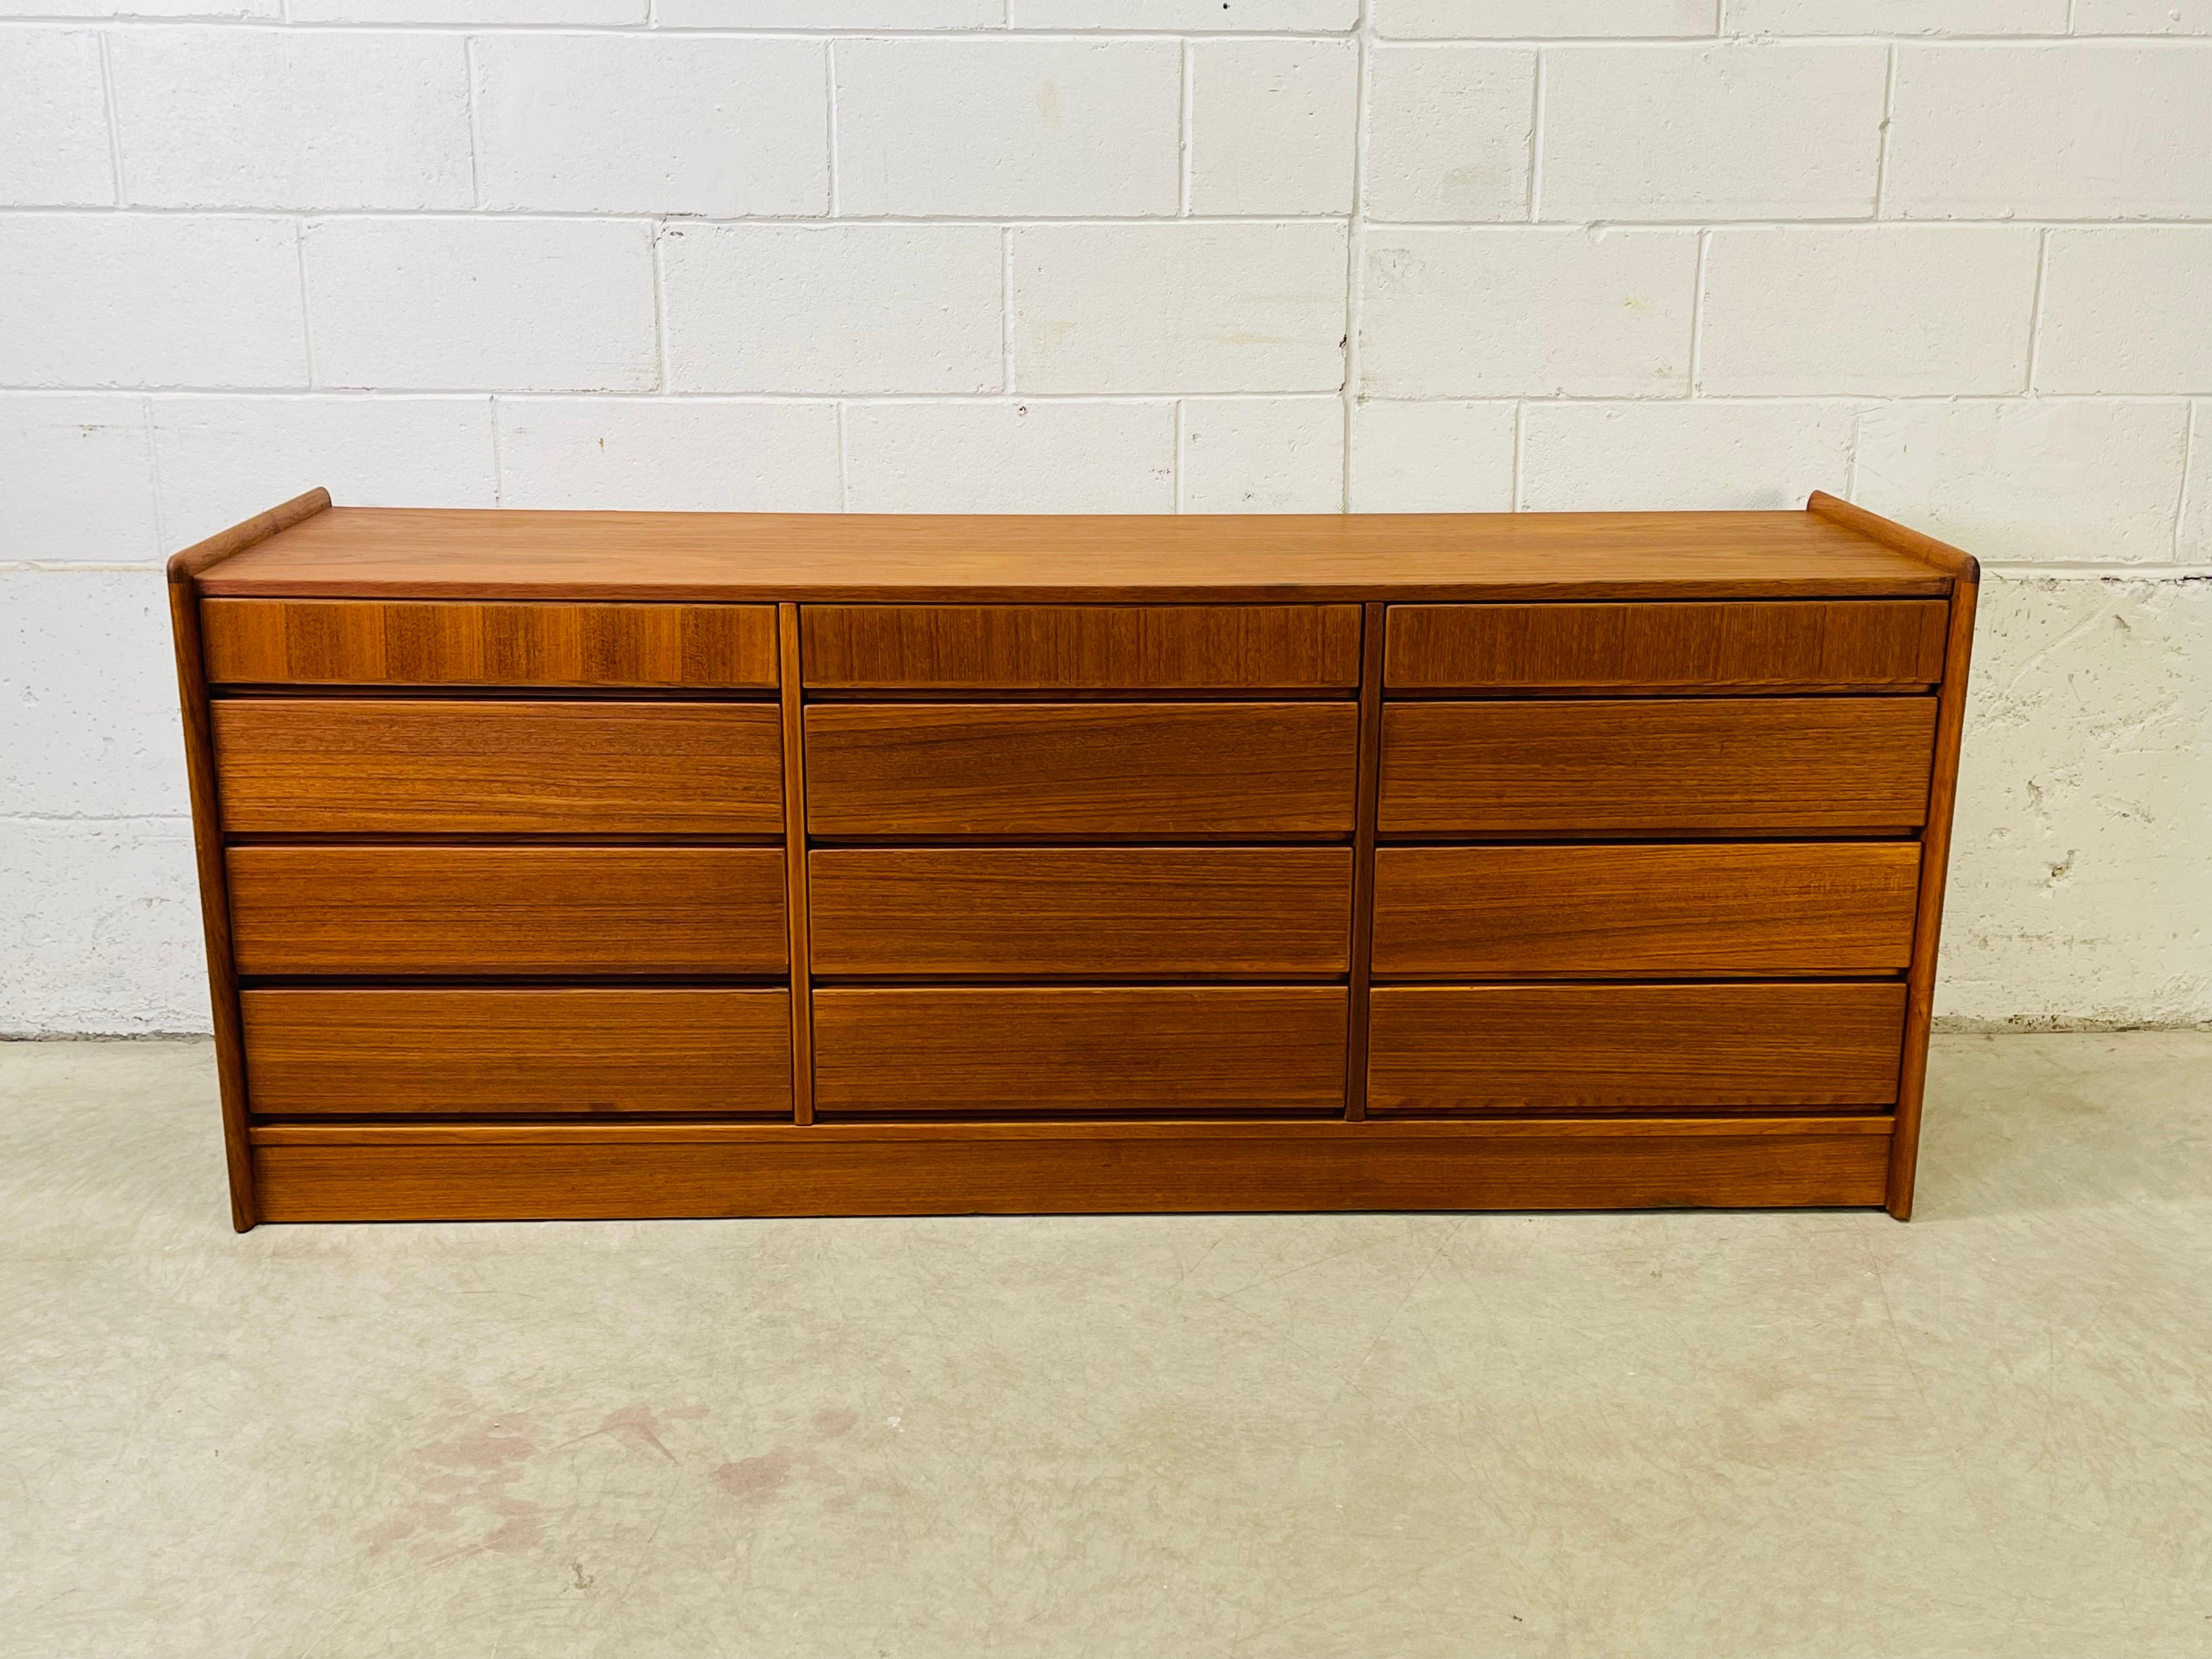 Vintage 1960s Danish teak long and low dresser with 12 drawers. The dresser drawers range in height from 3.25”H to 5.25”H. The interior of the dresser is a light birch wood. No marks.